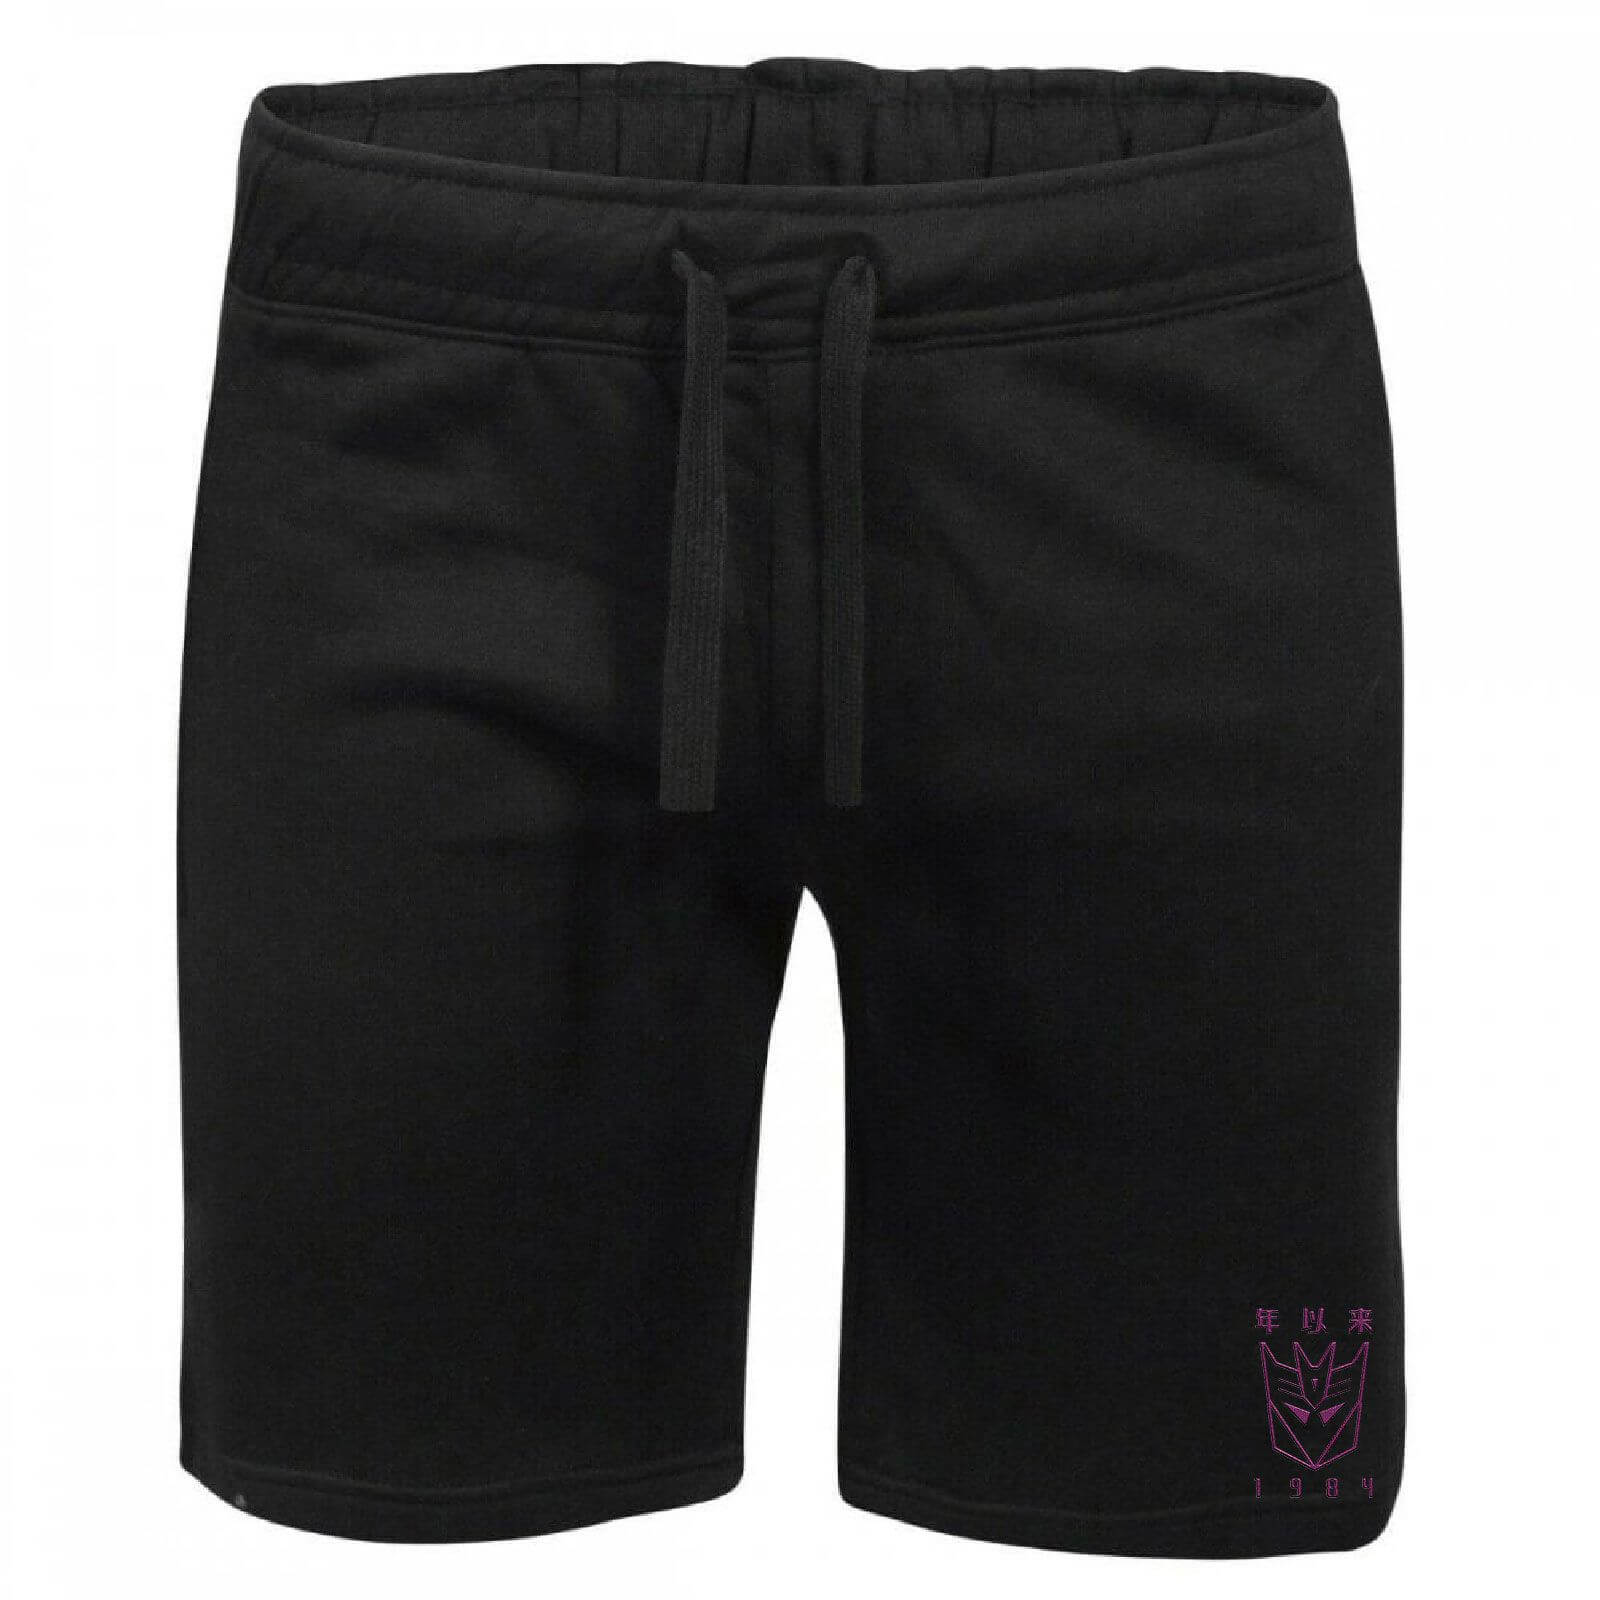 Transformers Decepticons Embroidered Unisex Jogger Shorts - Black - M